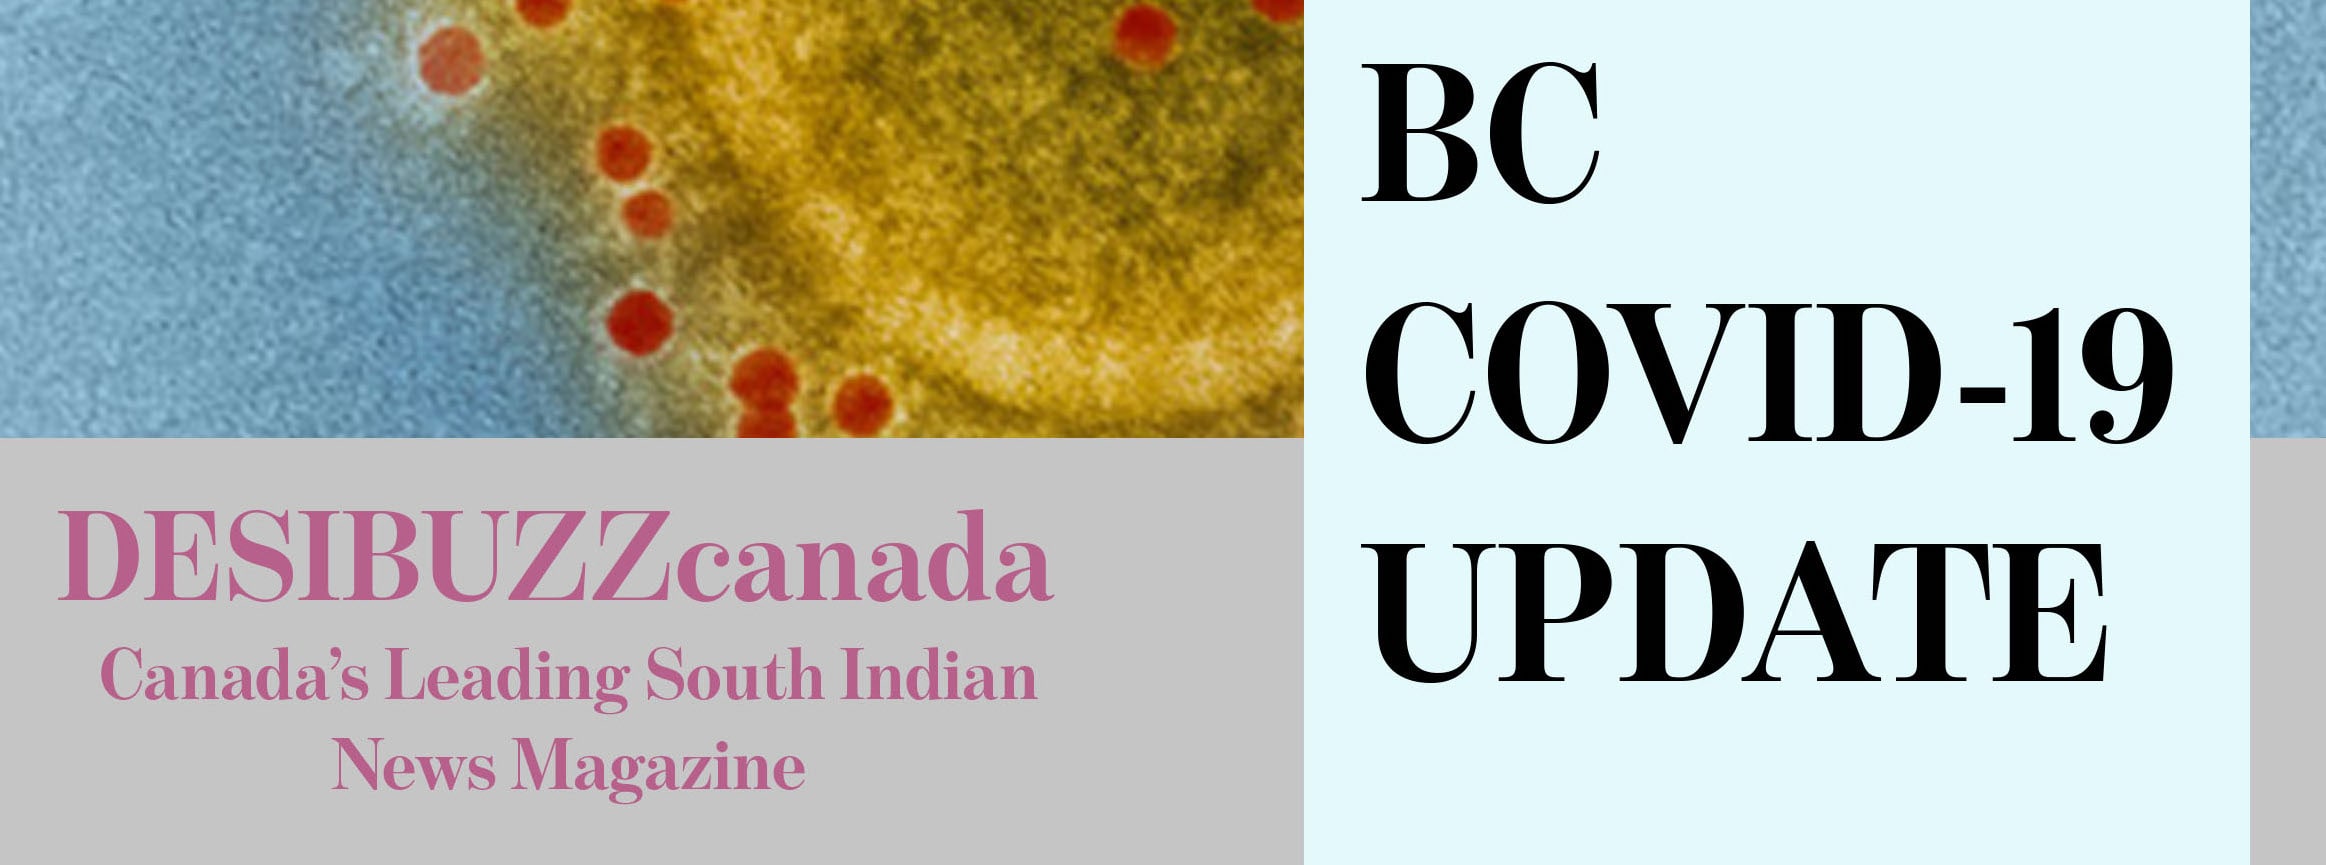 BC COVID-19 DAILY UPDATE: Cases Rise Slightly Wednesday With One New Death